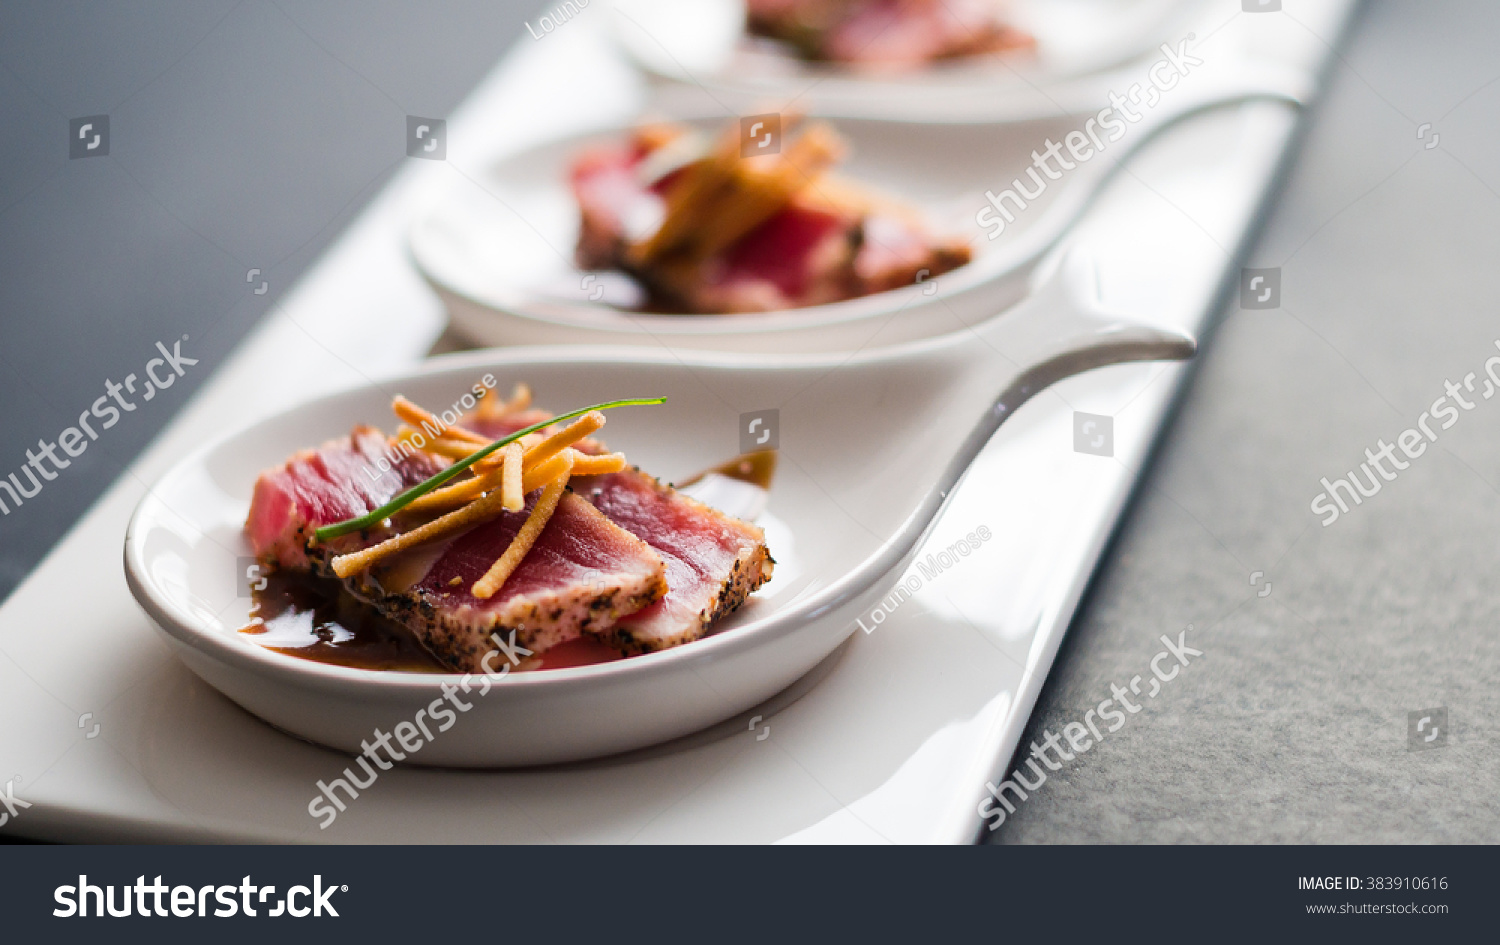 Tuna Tataki is a Japanese dish which consist of briefly seared tuna steak in thin slices. Served as appetizer with brandy sauce and garnish on a dark background. #383910616